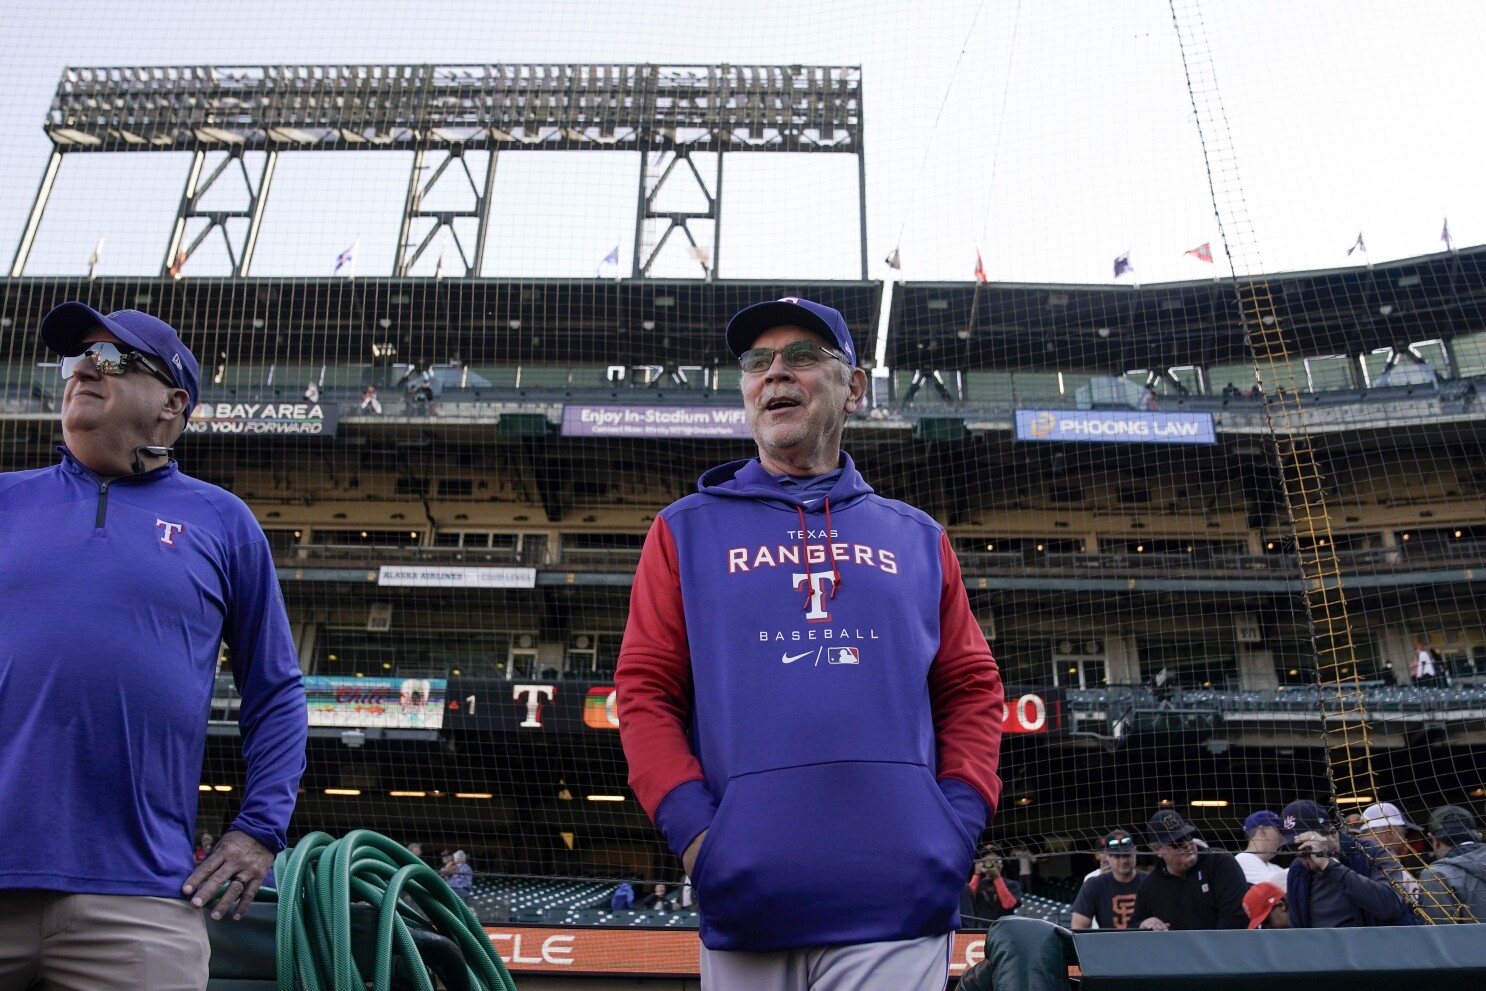 Bruce Bochy returns to Oracle Park to warm welcome guiding Texas Rangers